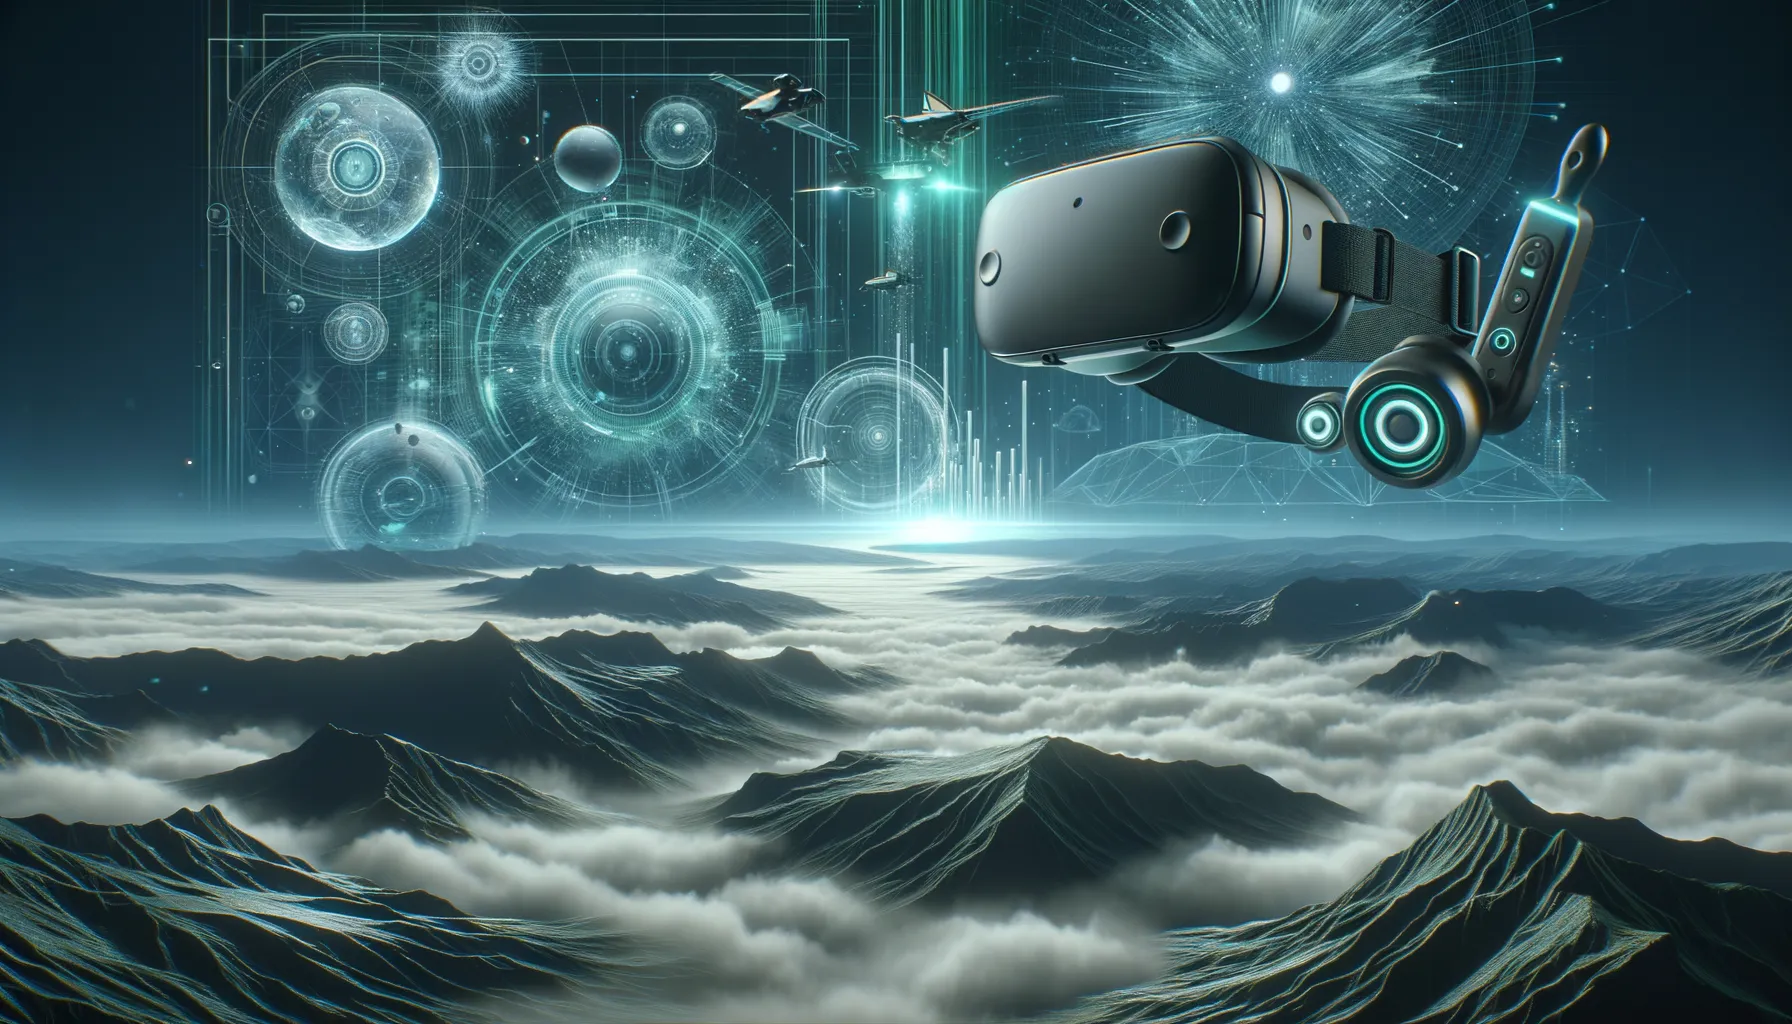 Imaginative digital art showcasing VR technology trends in dark colors with teal accents.